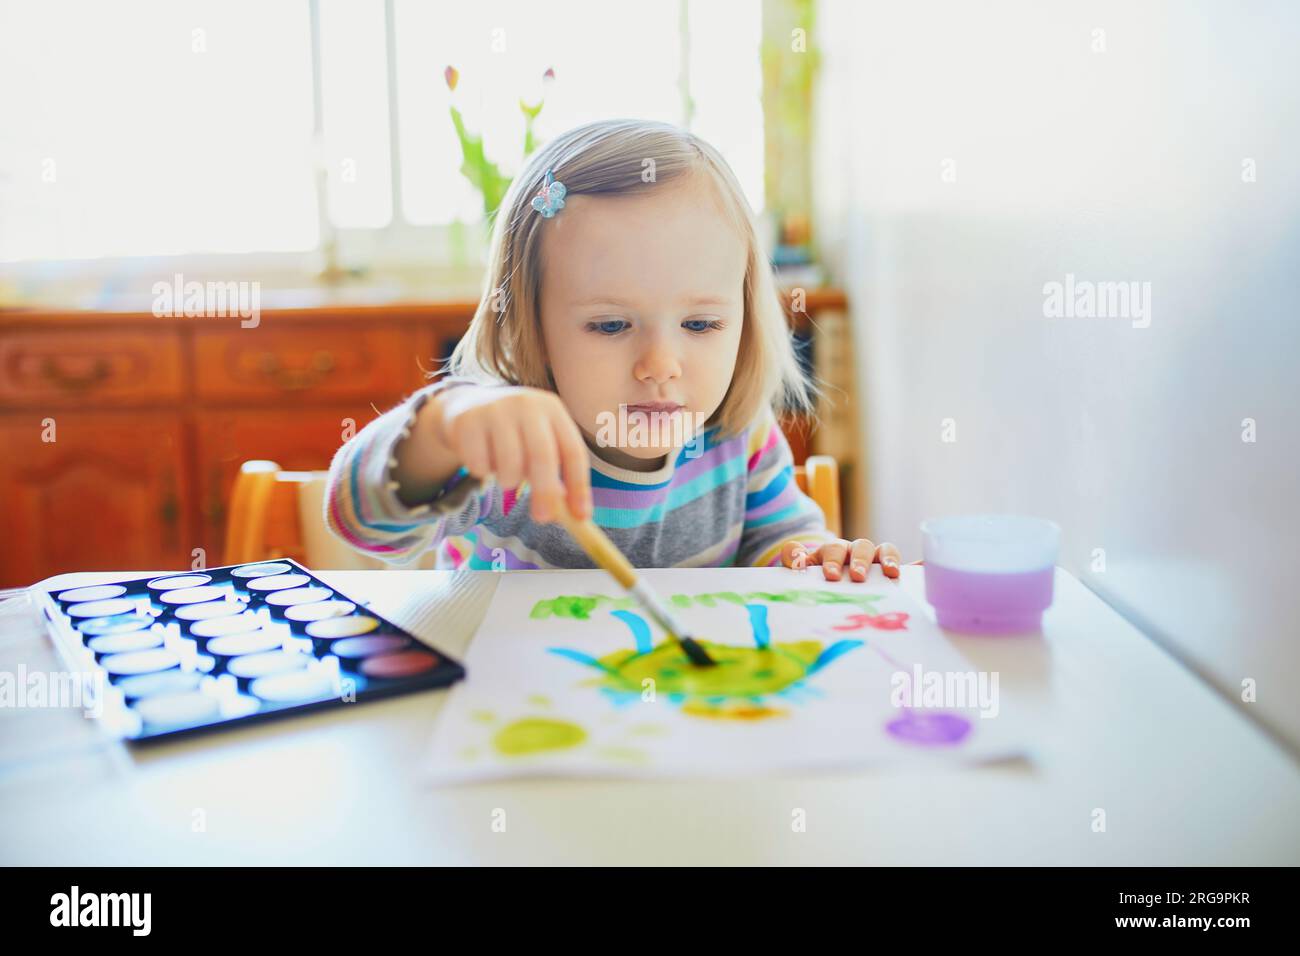 Adorable little girl painting with aquarelle at home, in kindergaten or preschool. Creative games for kids staying at home Stock Photo